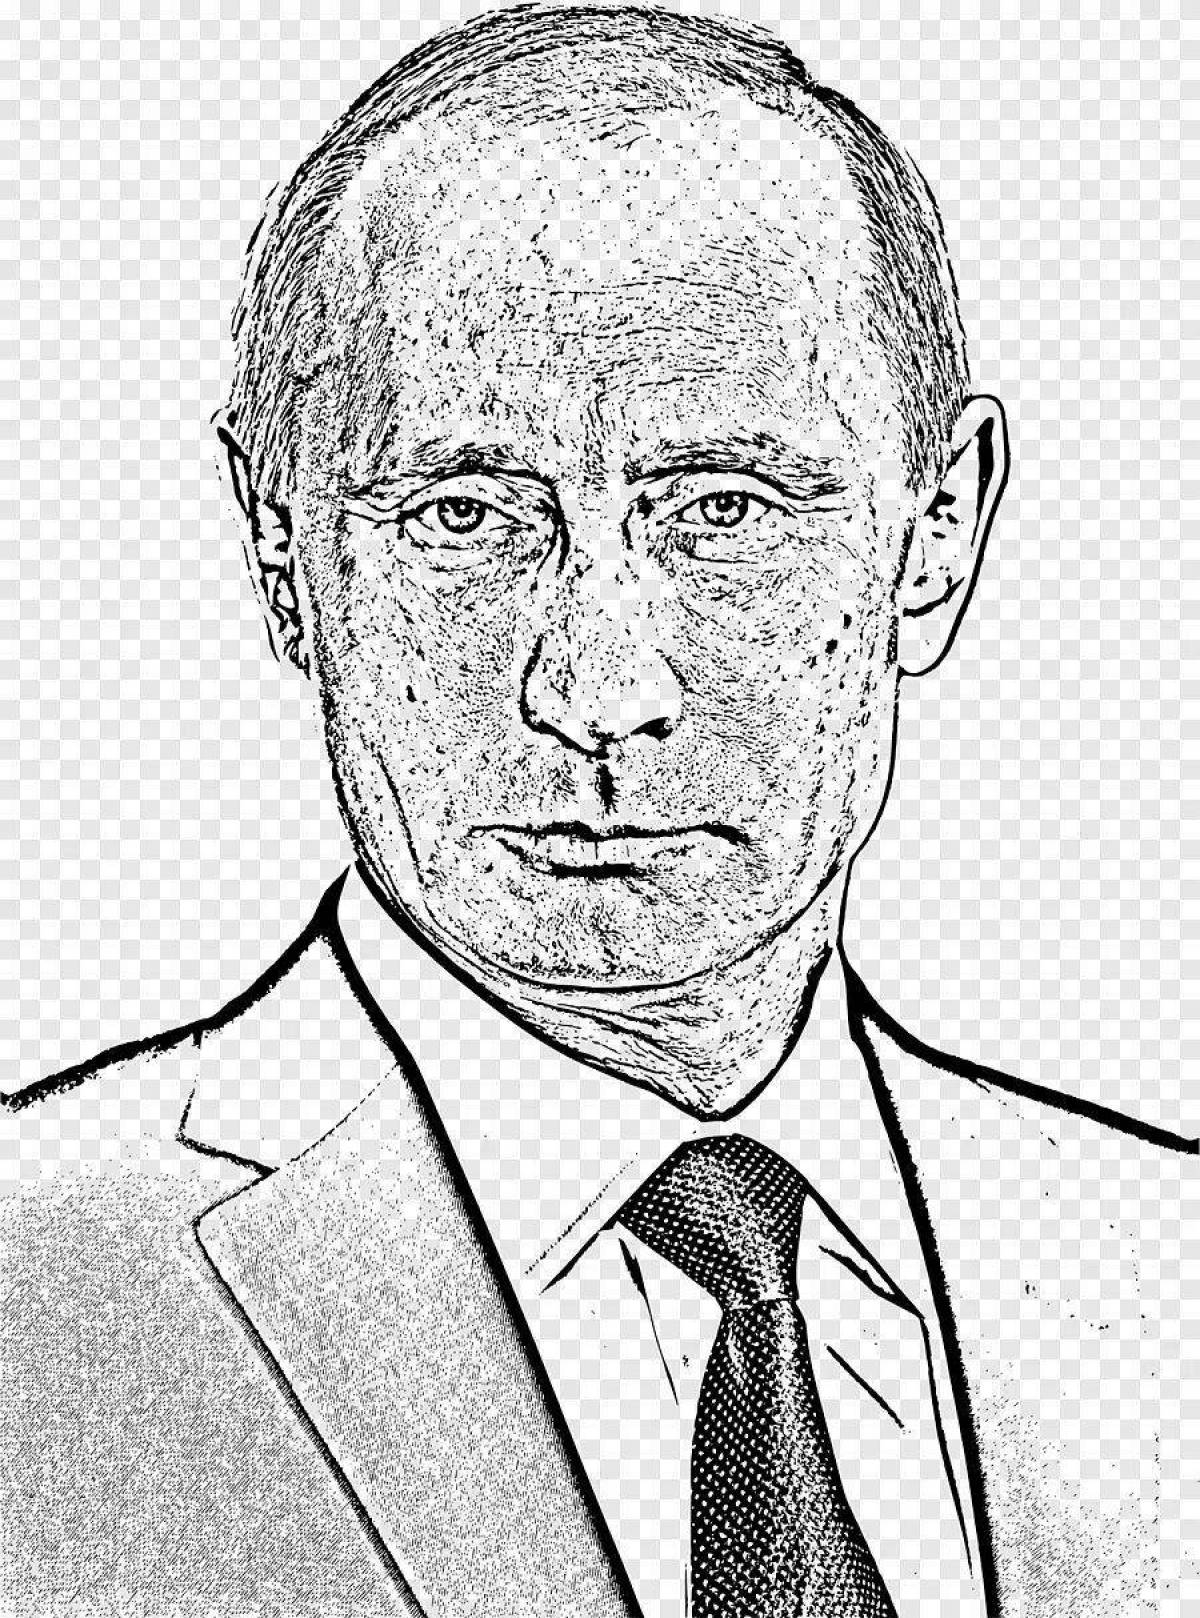 Putin bright coloring for kids